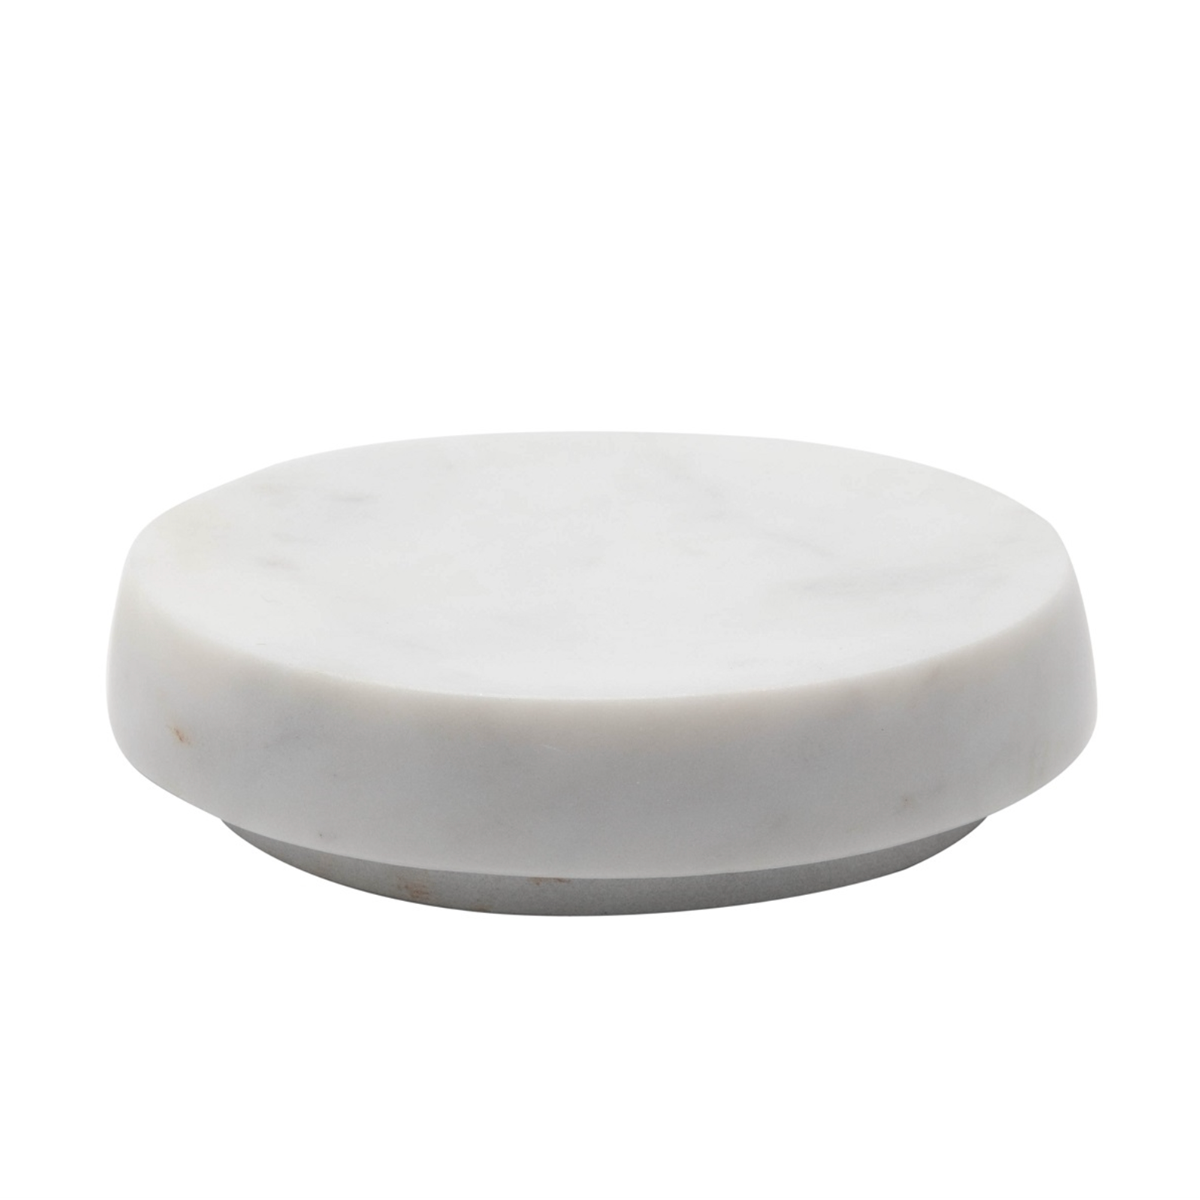 4" Marble Round Soap Dish - Wh